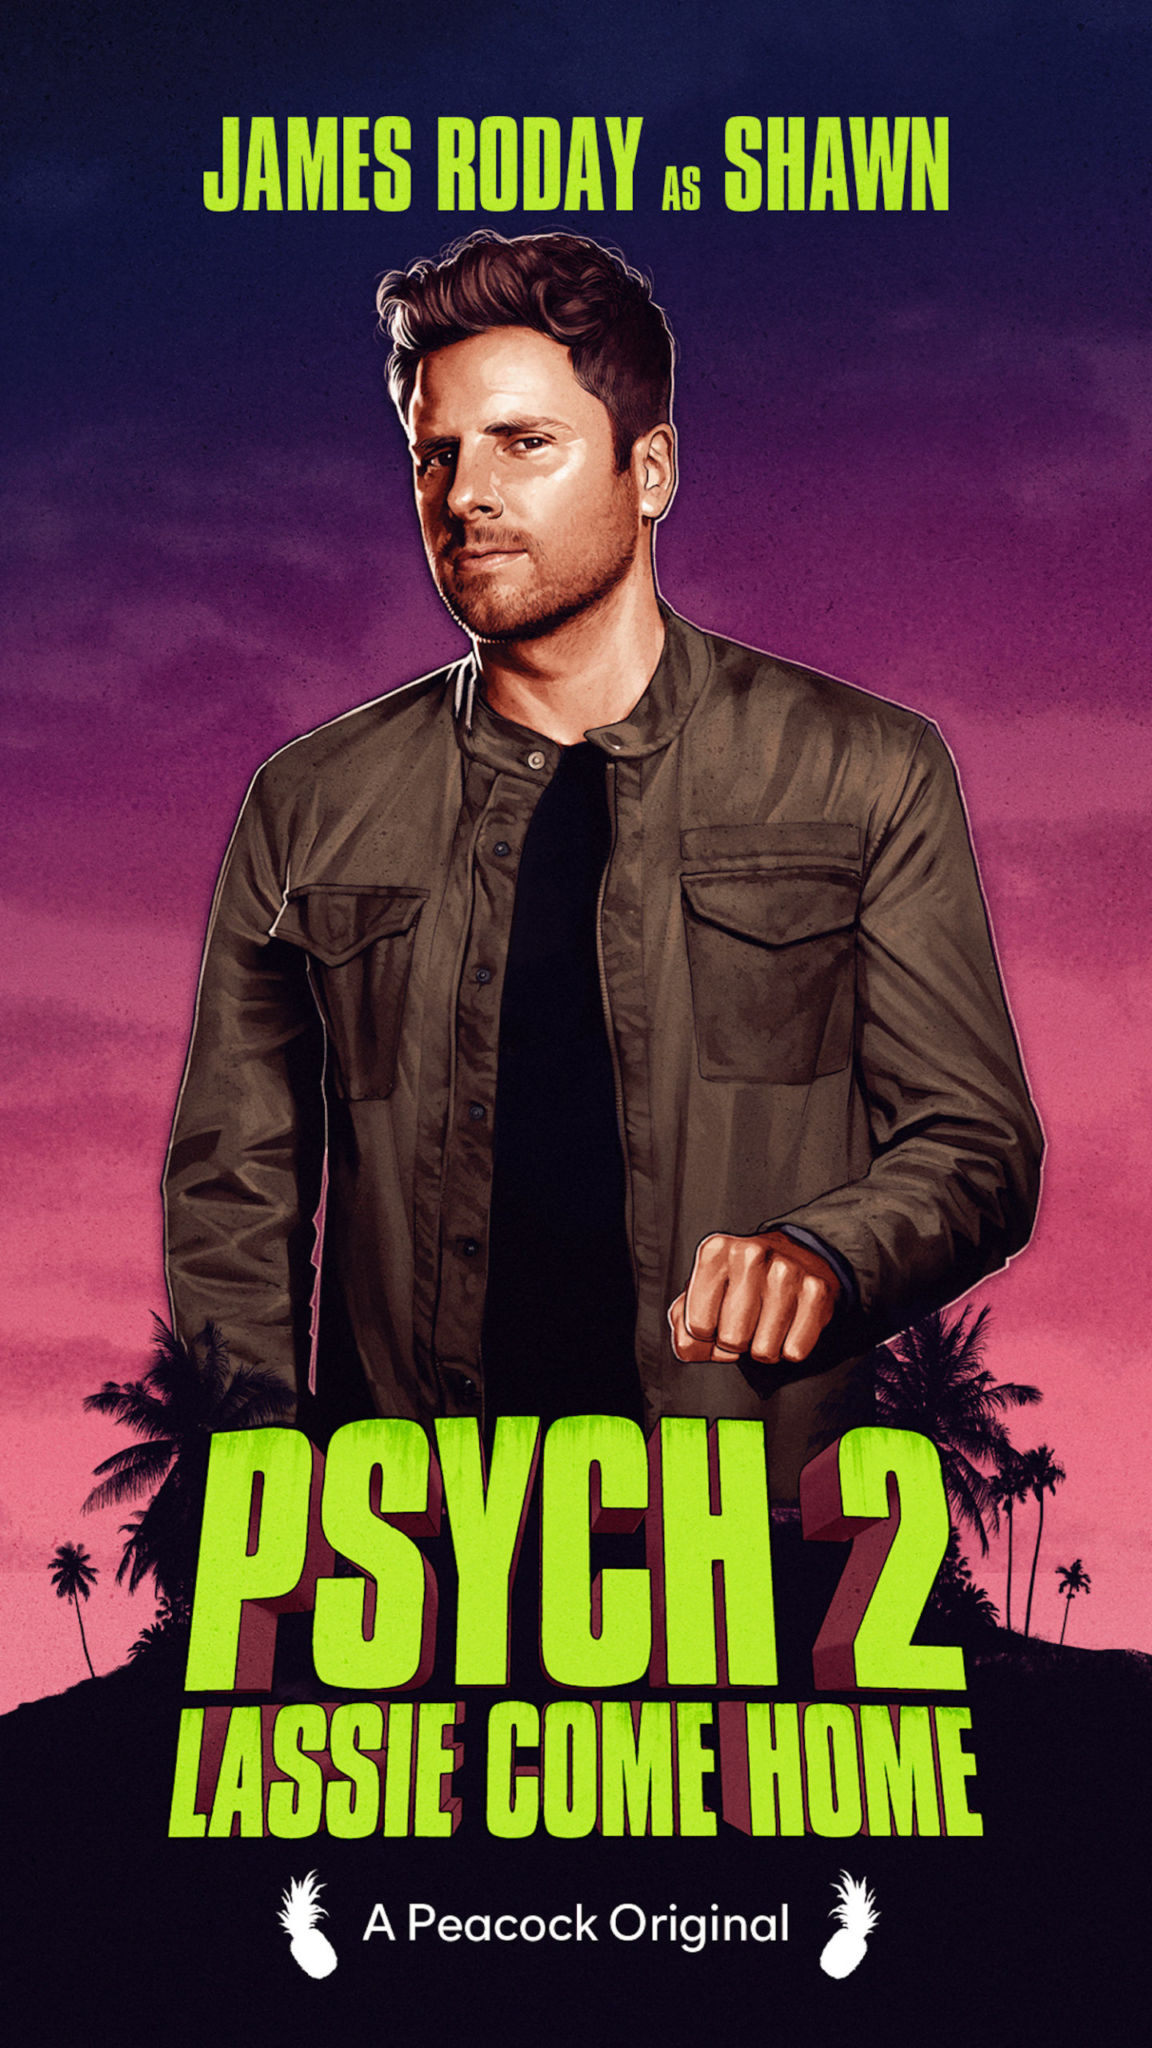 Psych 2 Character Illustration James Roday Shawn